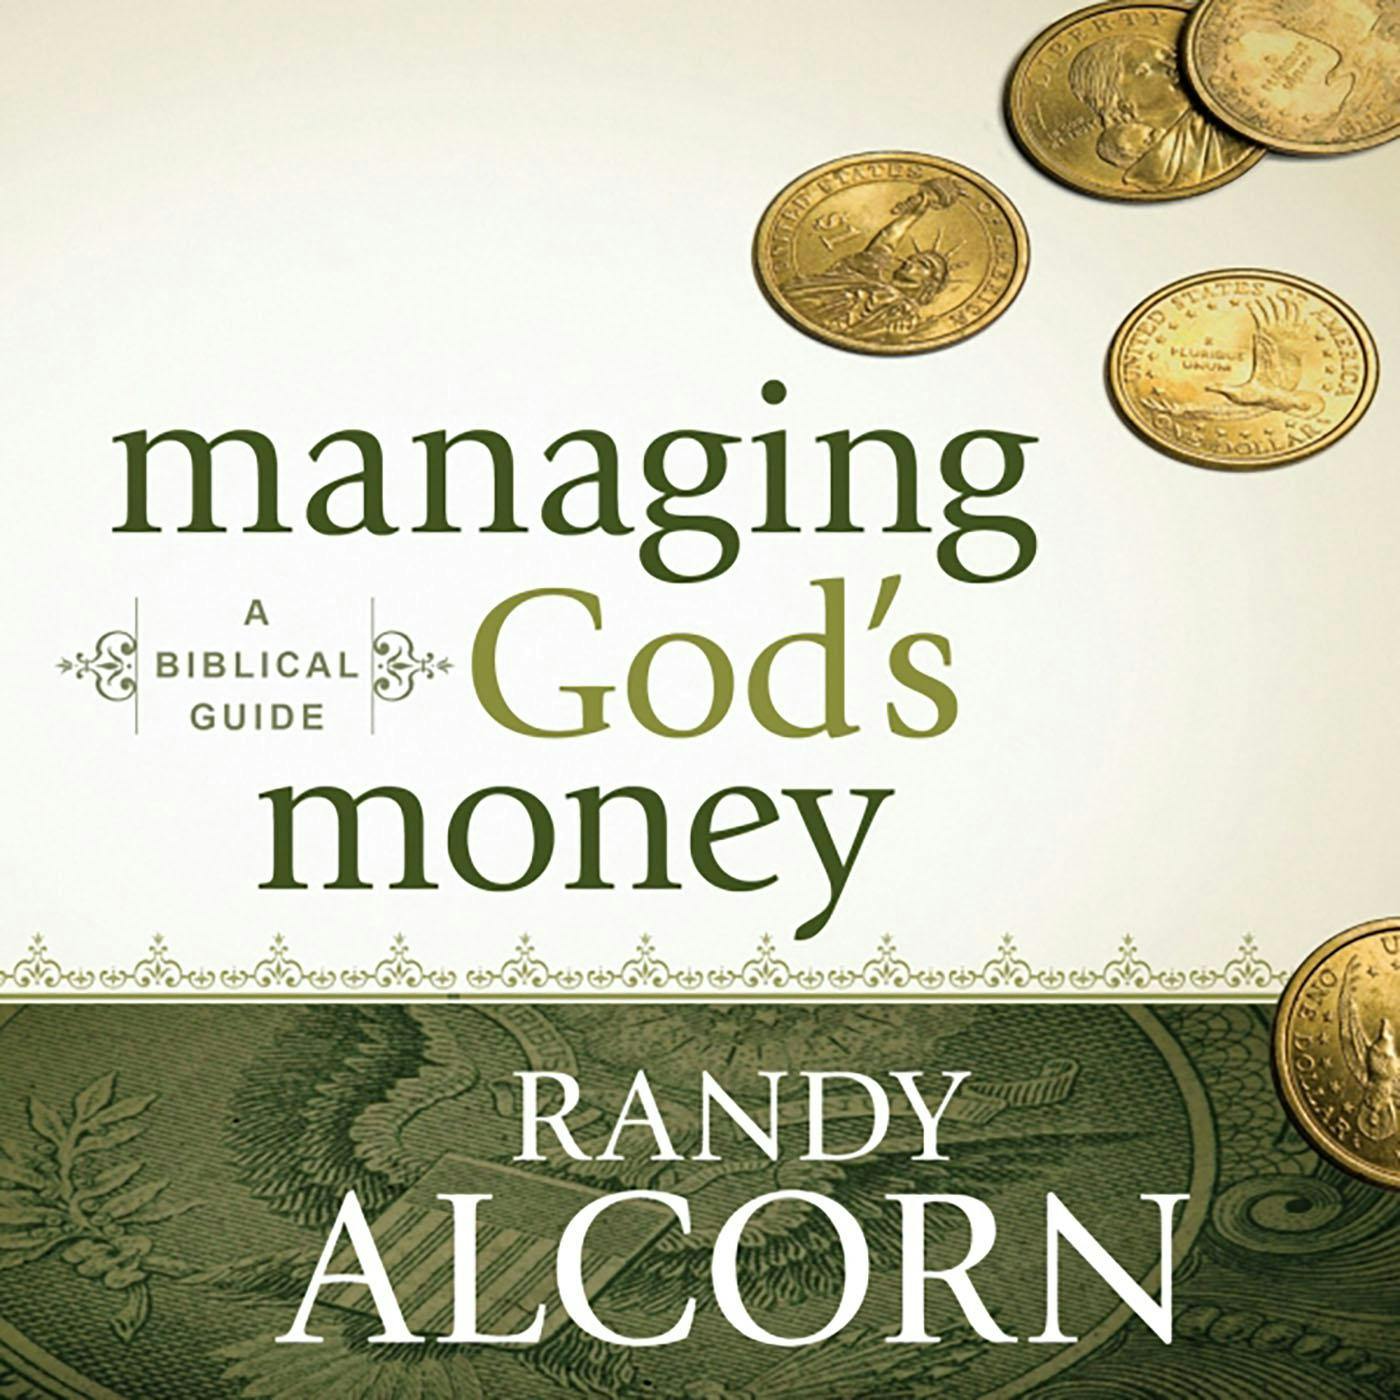 Managing God's Money: A Biblical Guide - undefined